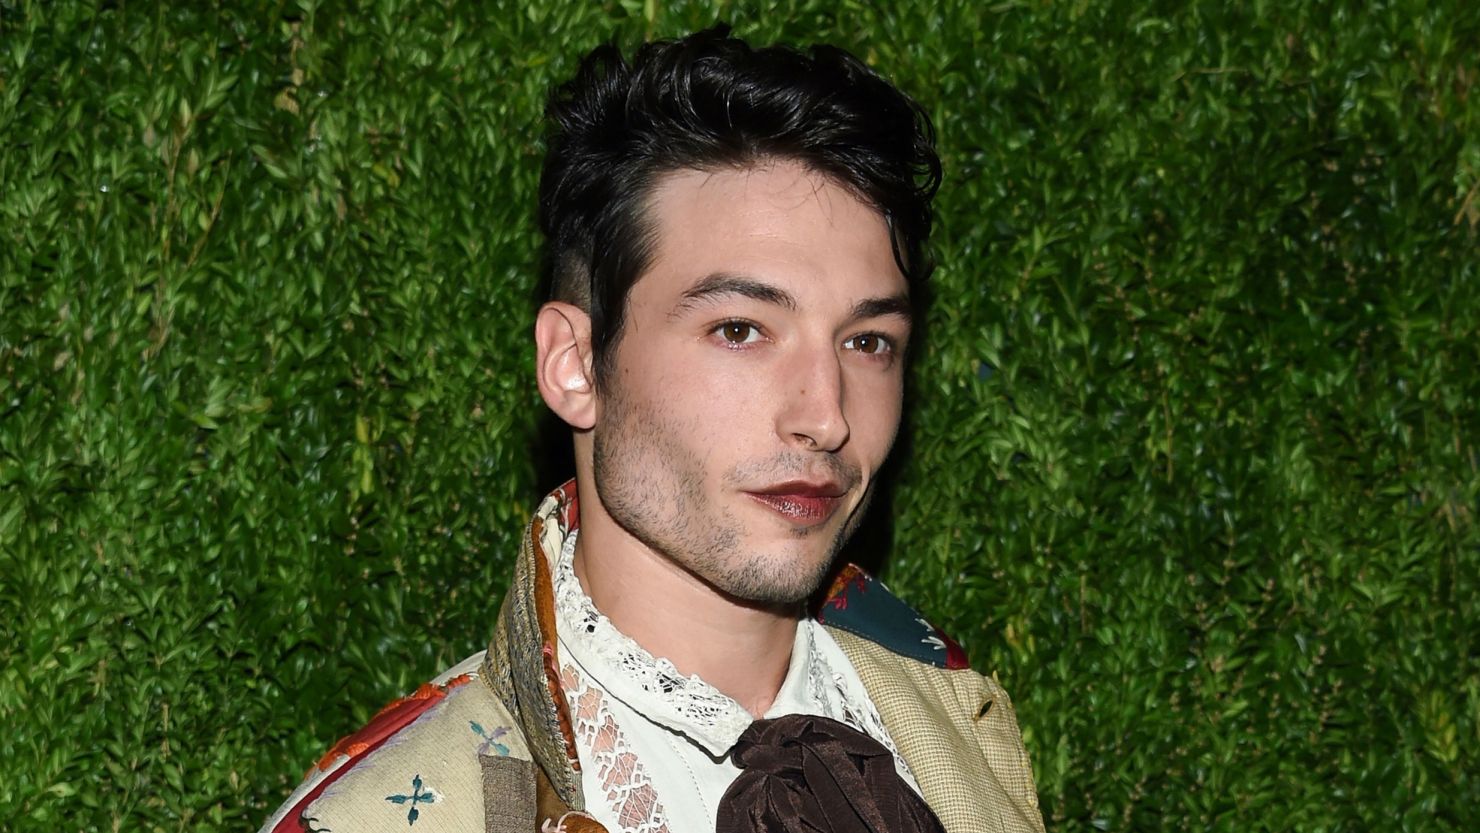 Ezra Miller attends the 15th annual CFDA/Vogue Fashion Fund in New York on November 5, 2018.